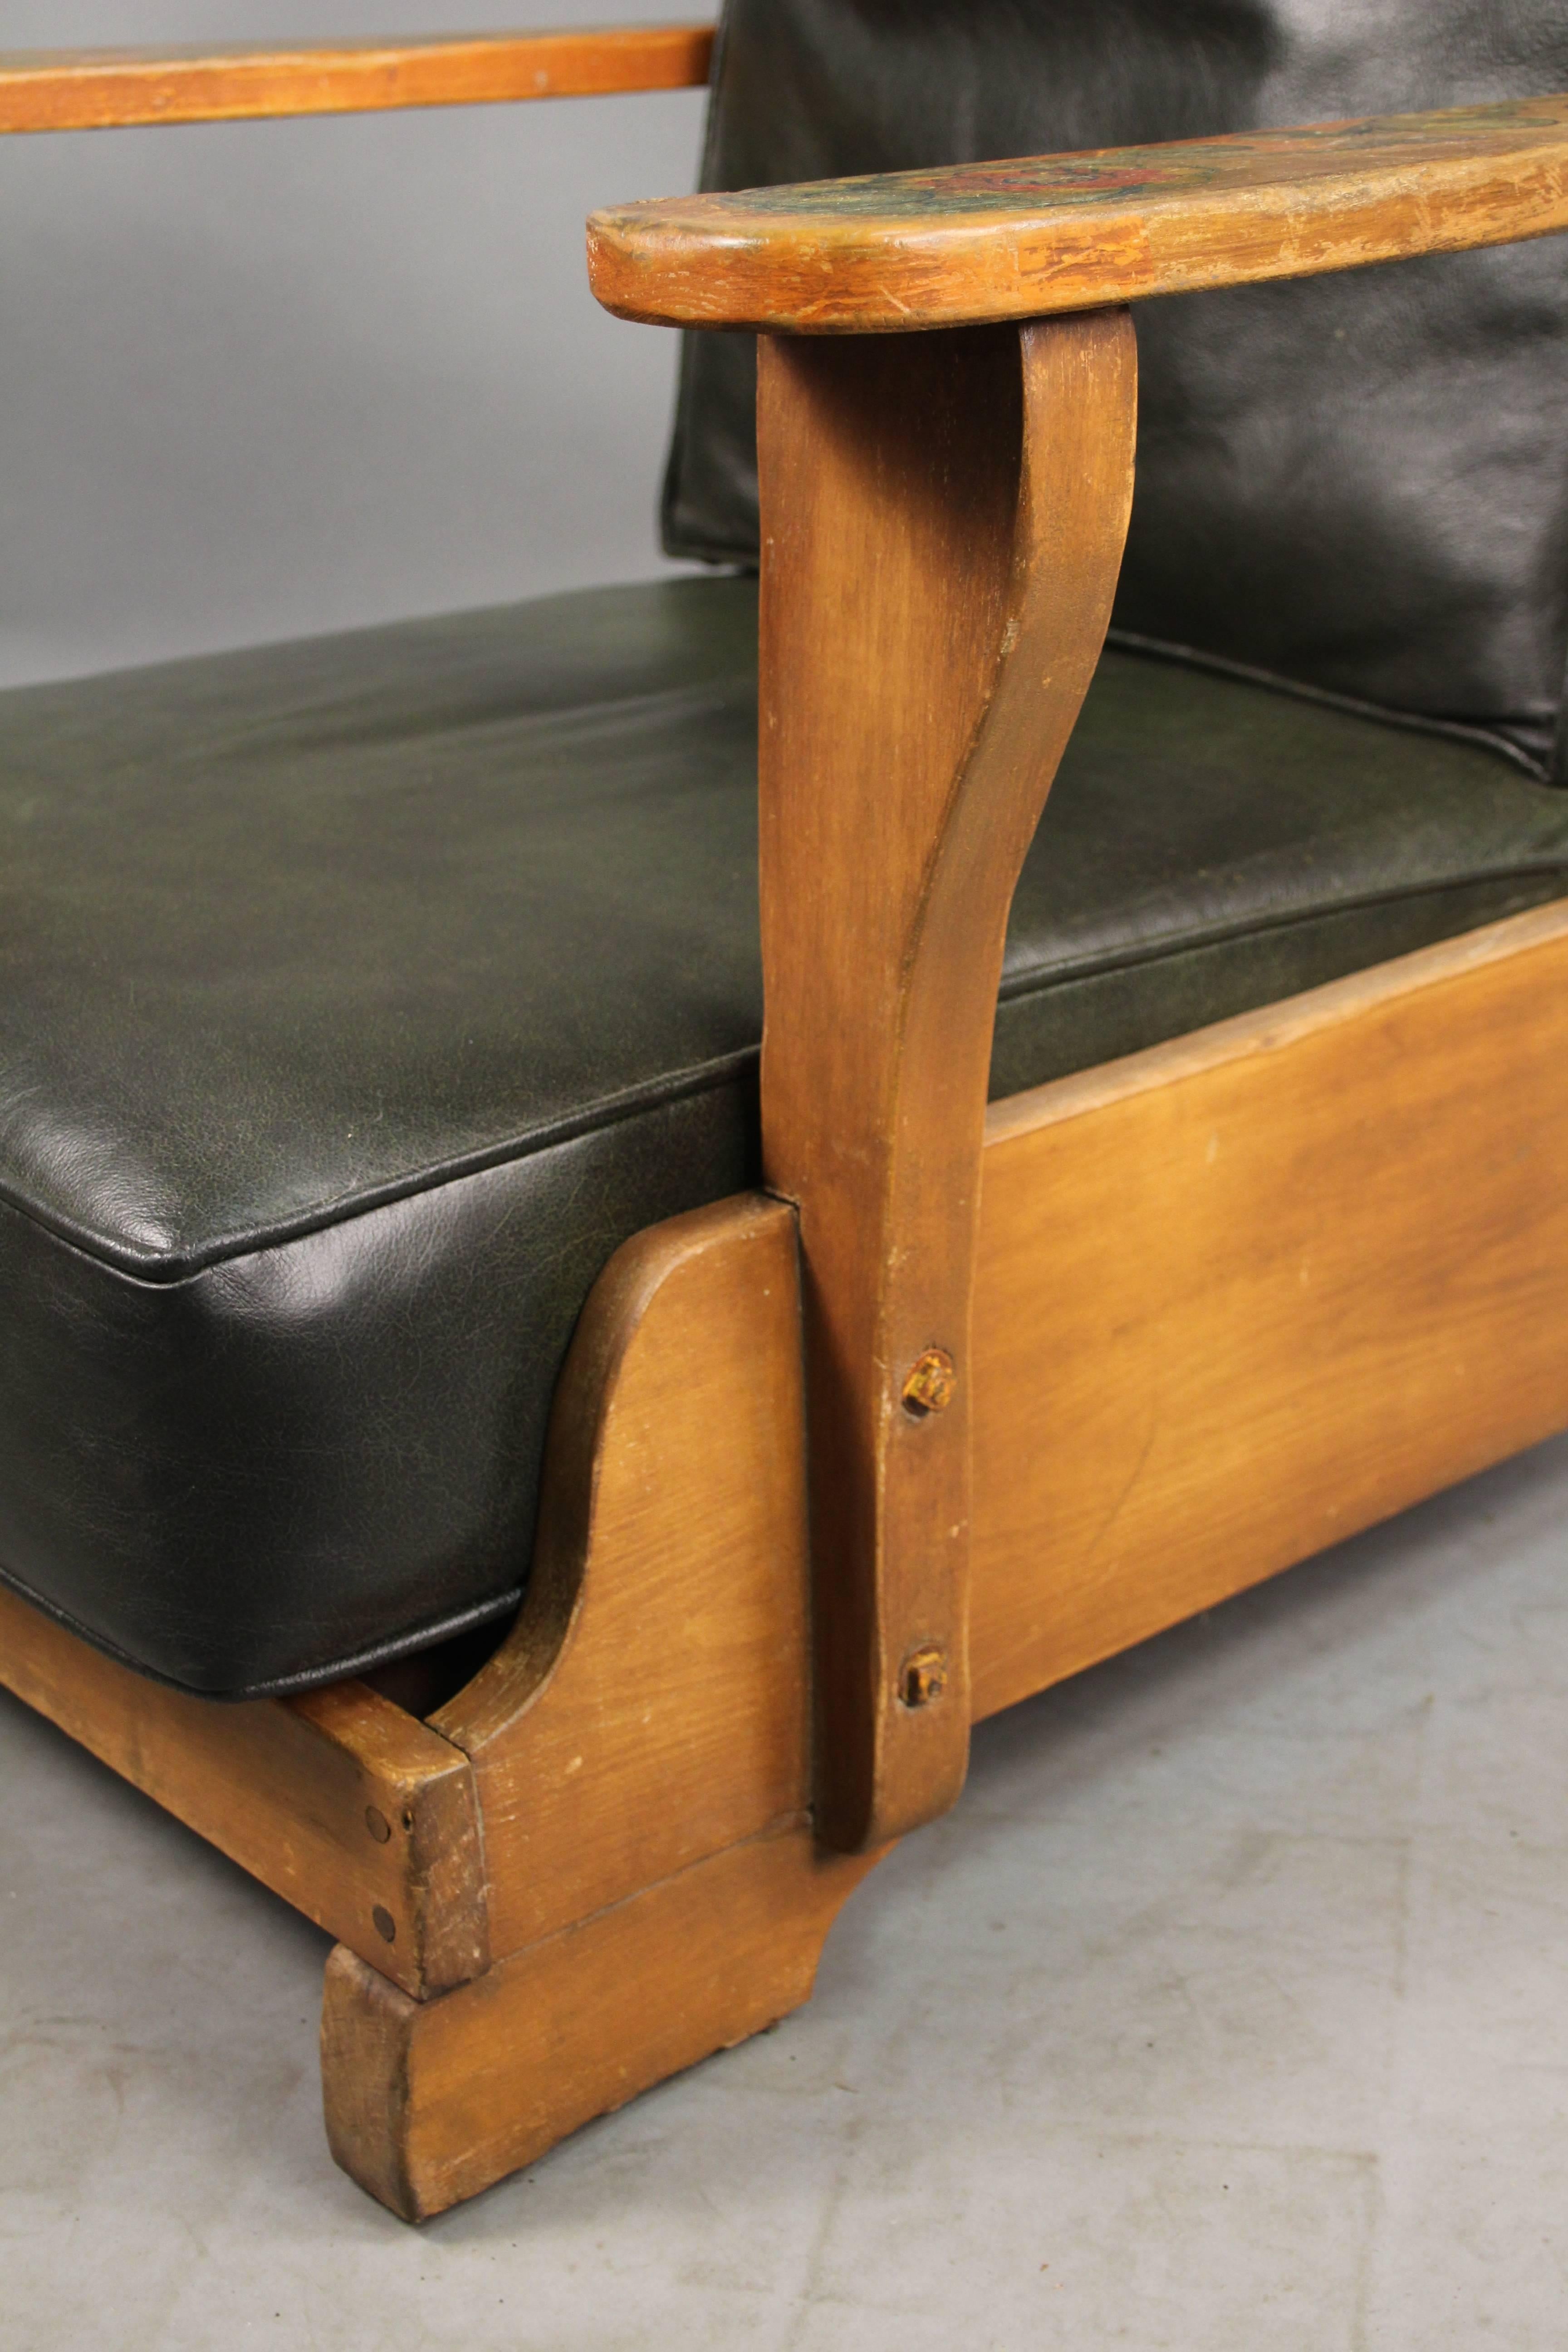 Rancho Monterey Signed Monterey Armchair with New Dark Green Leather Upholstery, circa 1930s